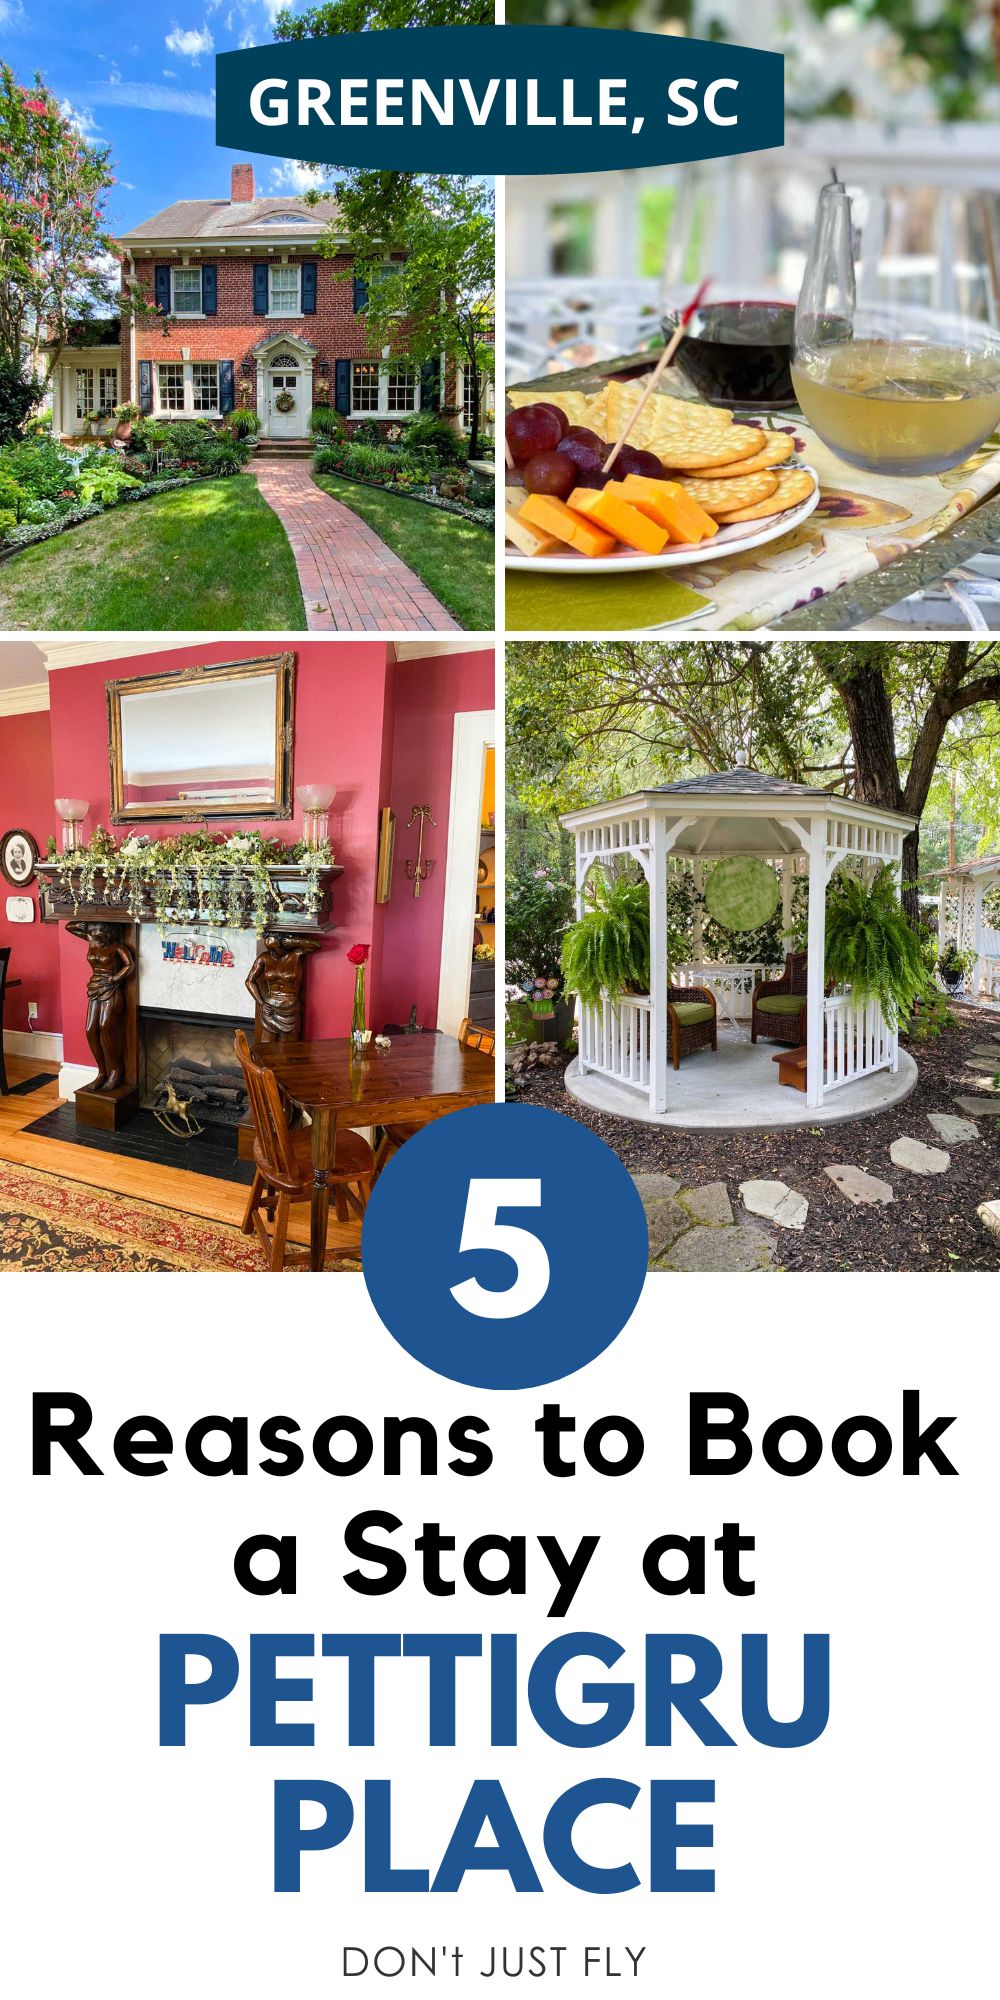 A collage of photos show all the details of the bed and breakfast in Greenville, SC.